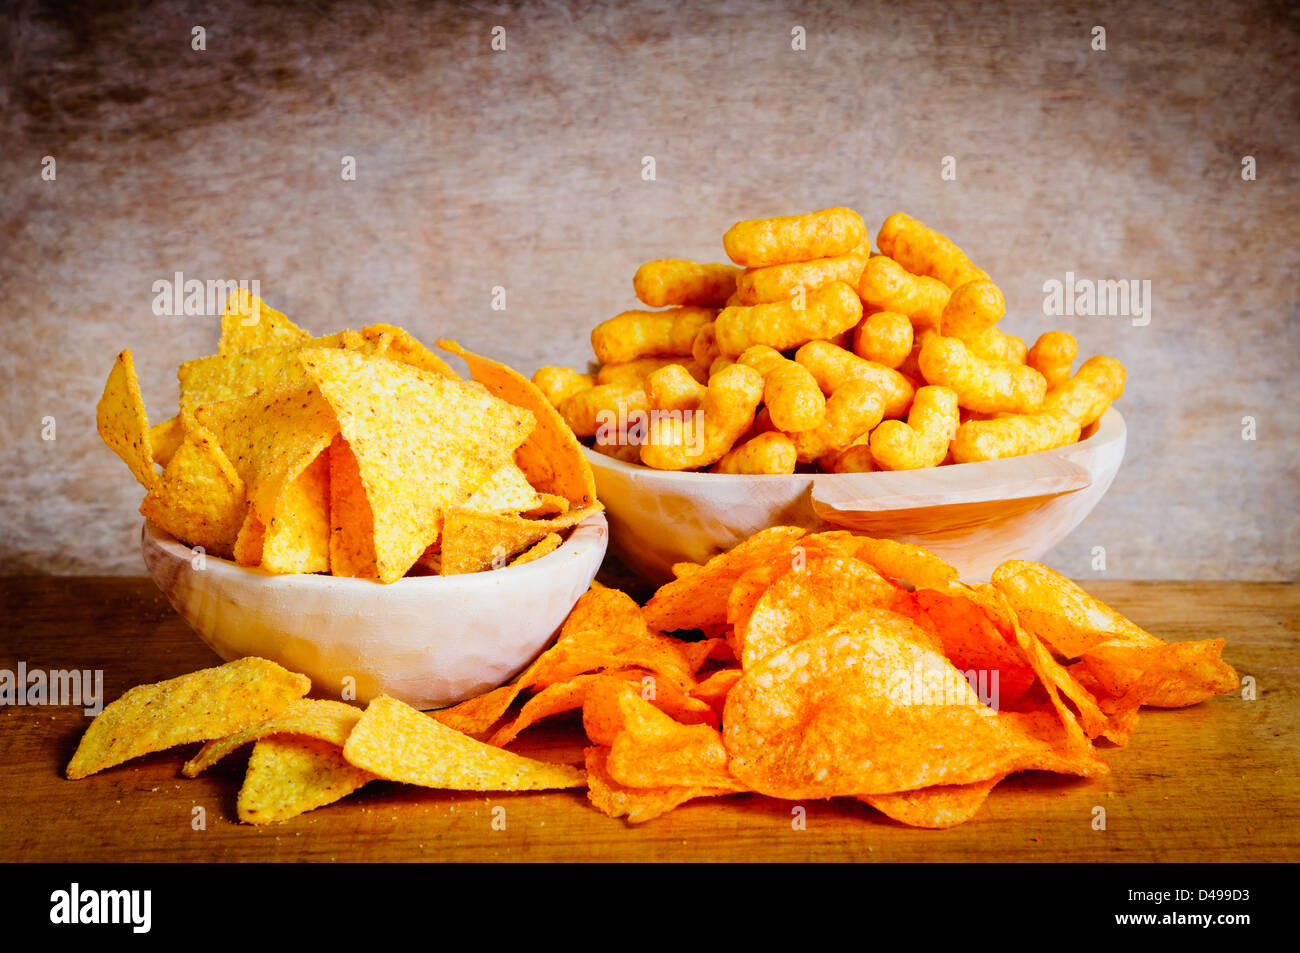 Chips, nachos and curls snacks on a wooden background Stock Photo